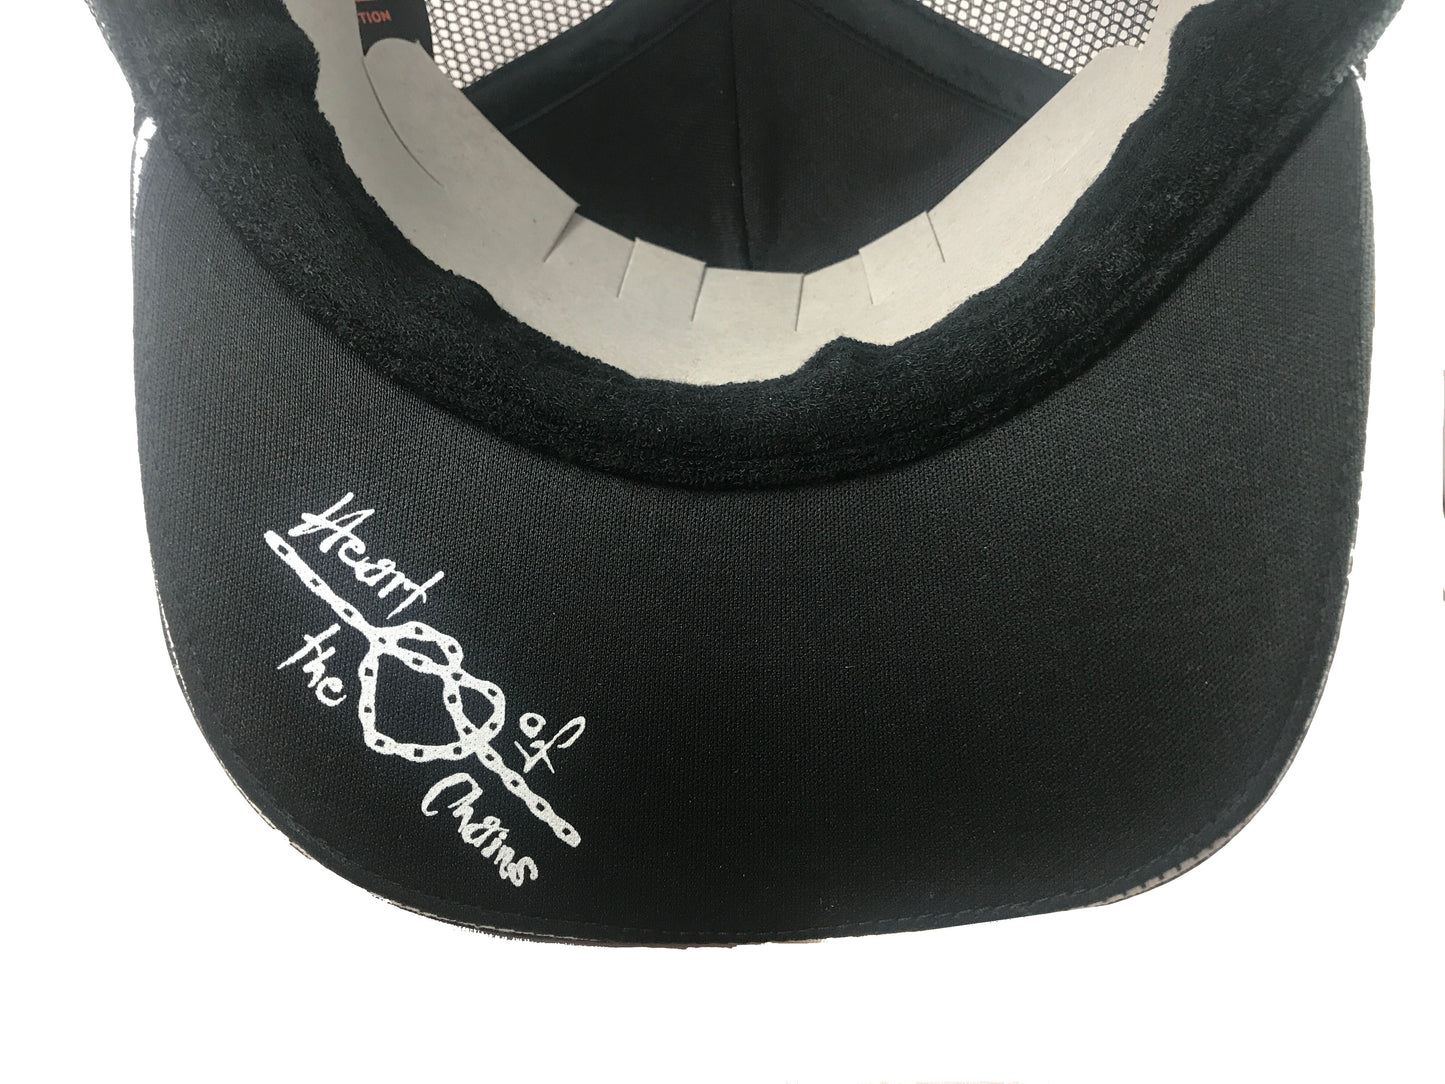 An image showing Kona Trucker Cap,  "heart of the chains" stitched underside print